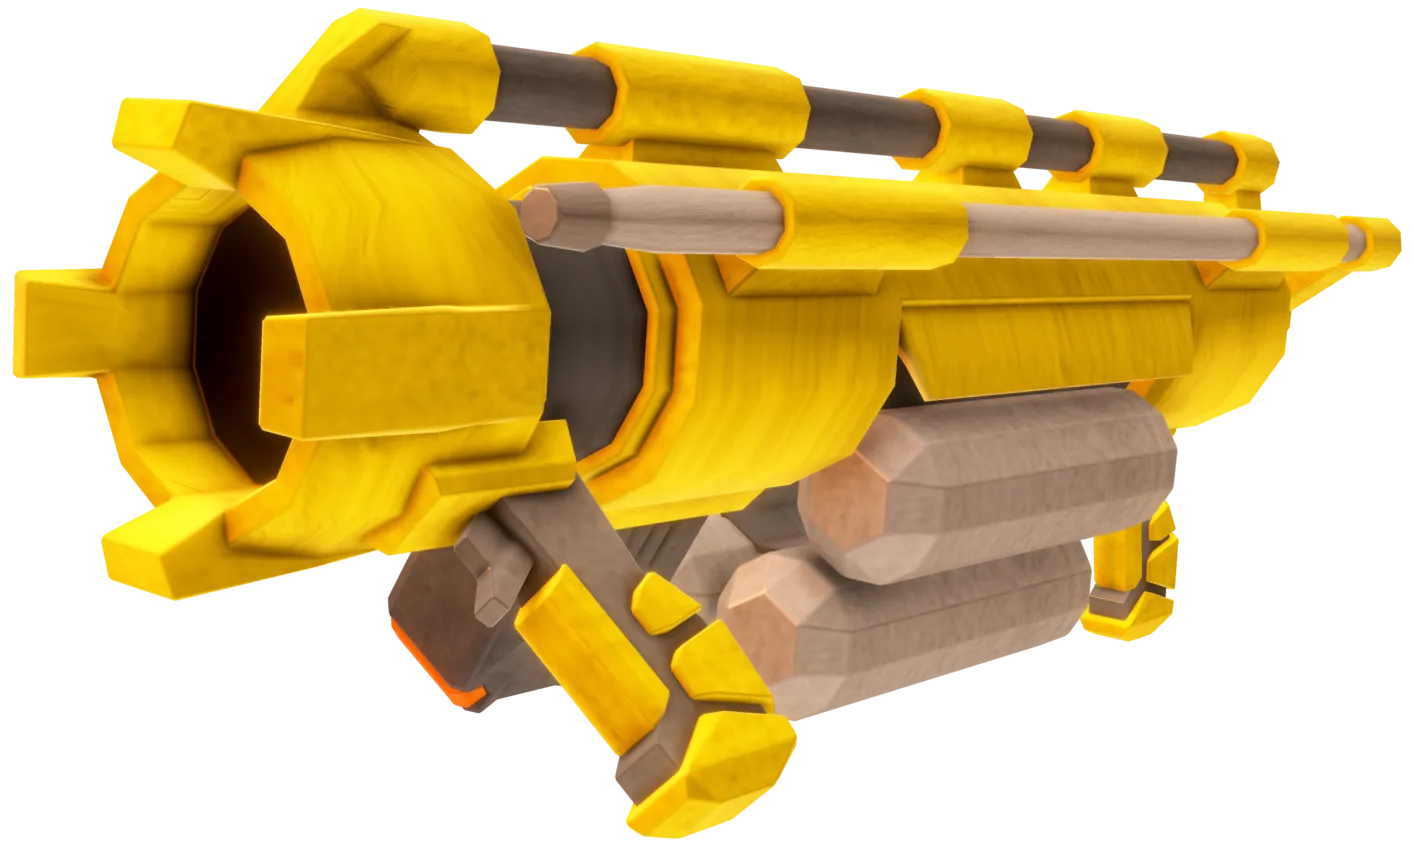 A large cylindrical bright yellow tool composed of several sections, with a revolving hexagonal-packed 6 foam canister magazine, two handles, and a battery.